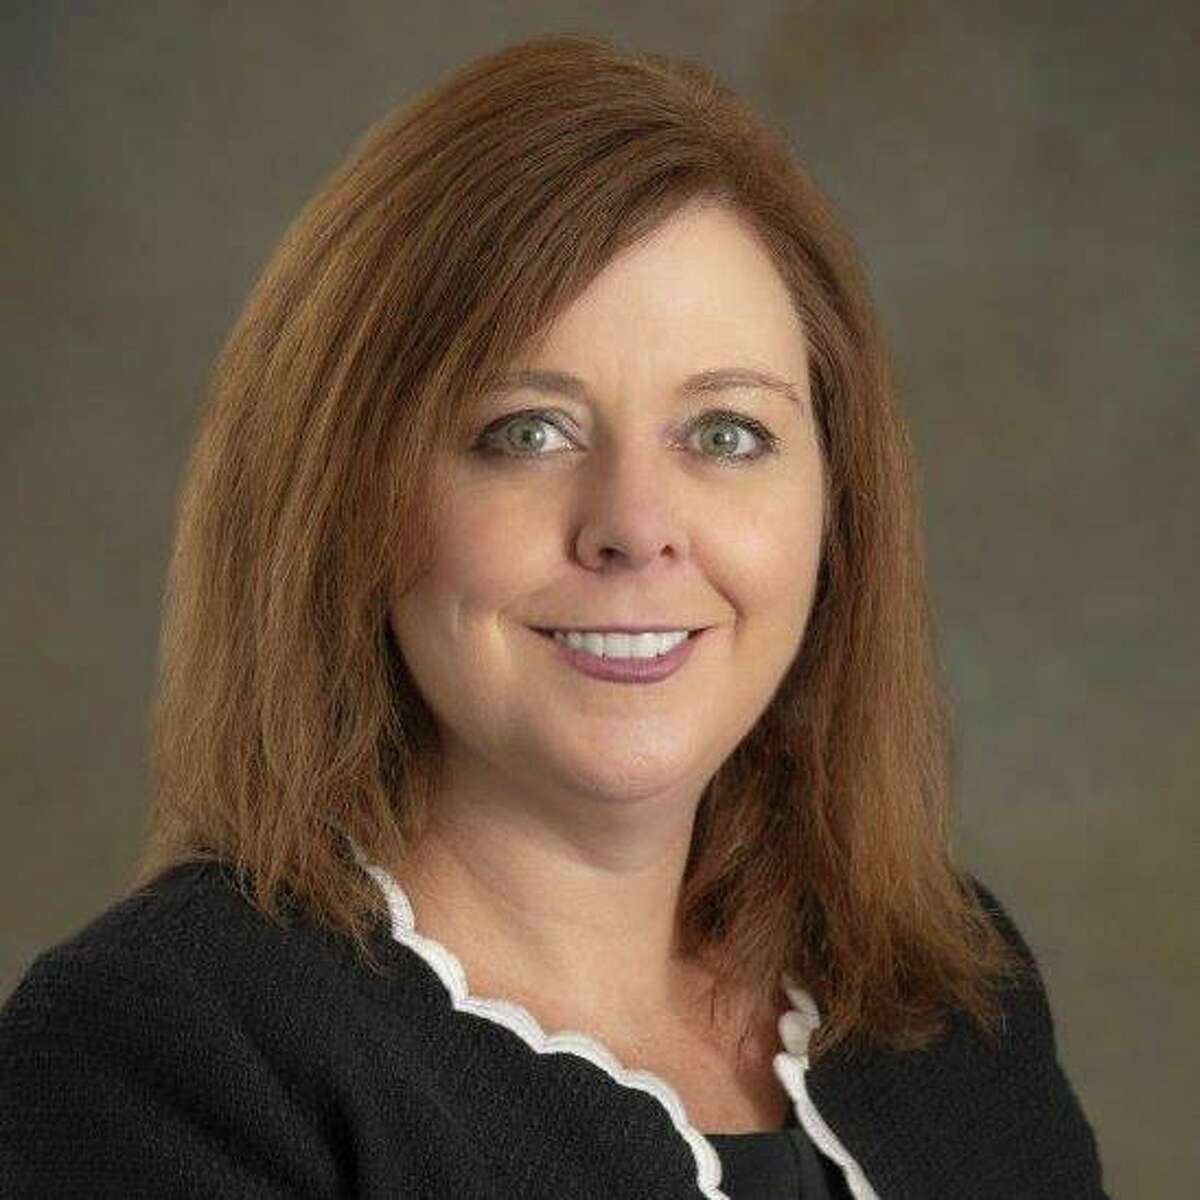 Stephanie Muth, a health care consultant and former Medicaid director at the Health and Human Services Commission, now oversees the Department of Family and Protective Services.